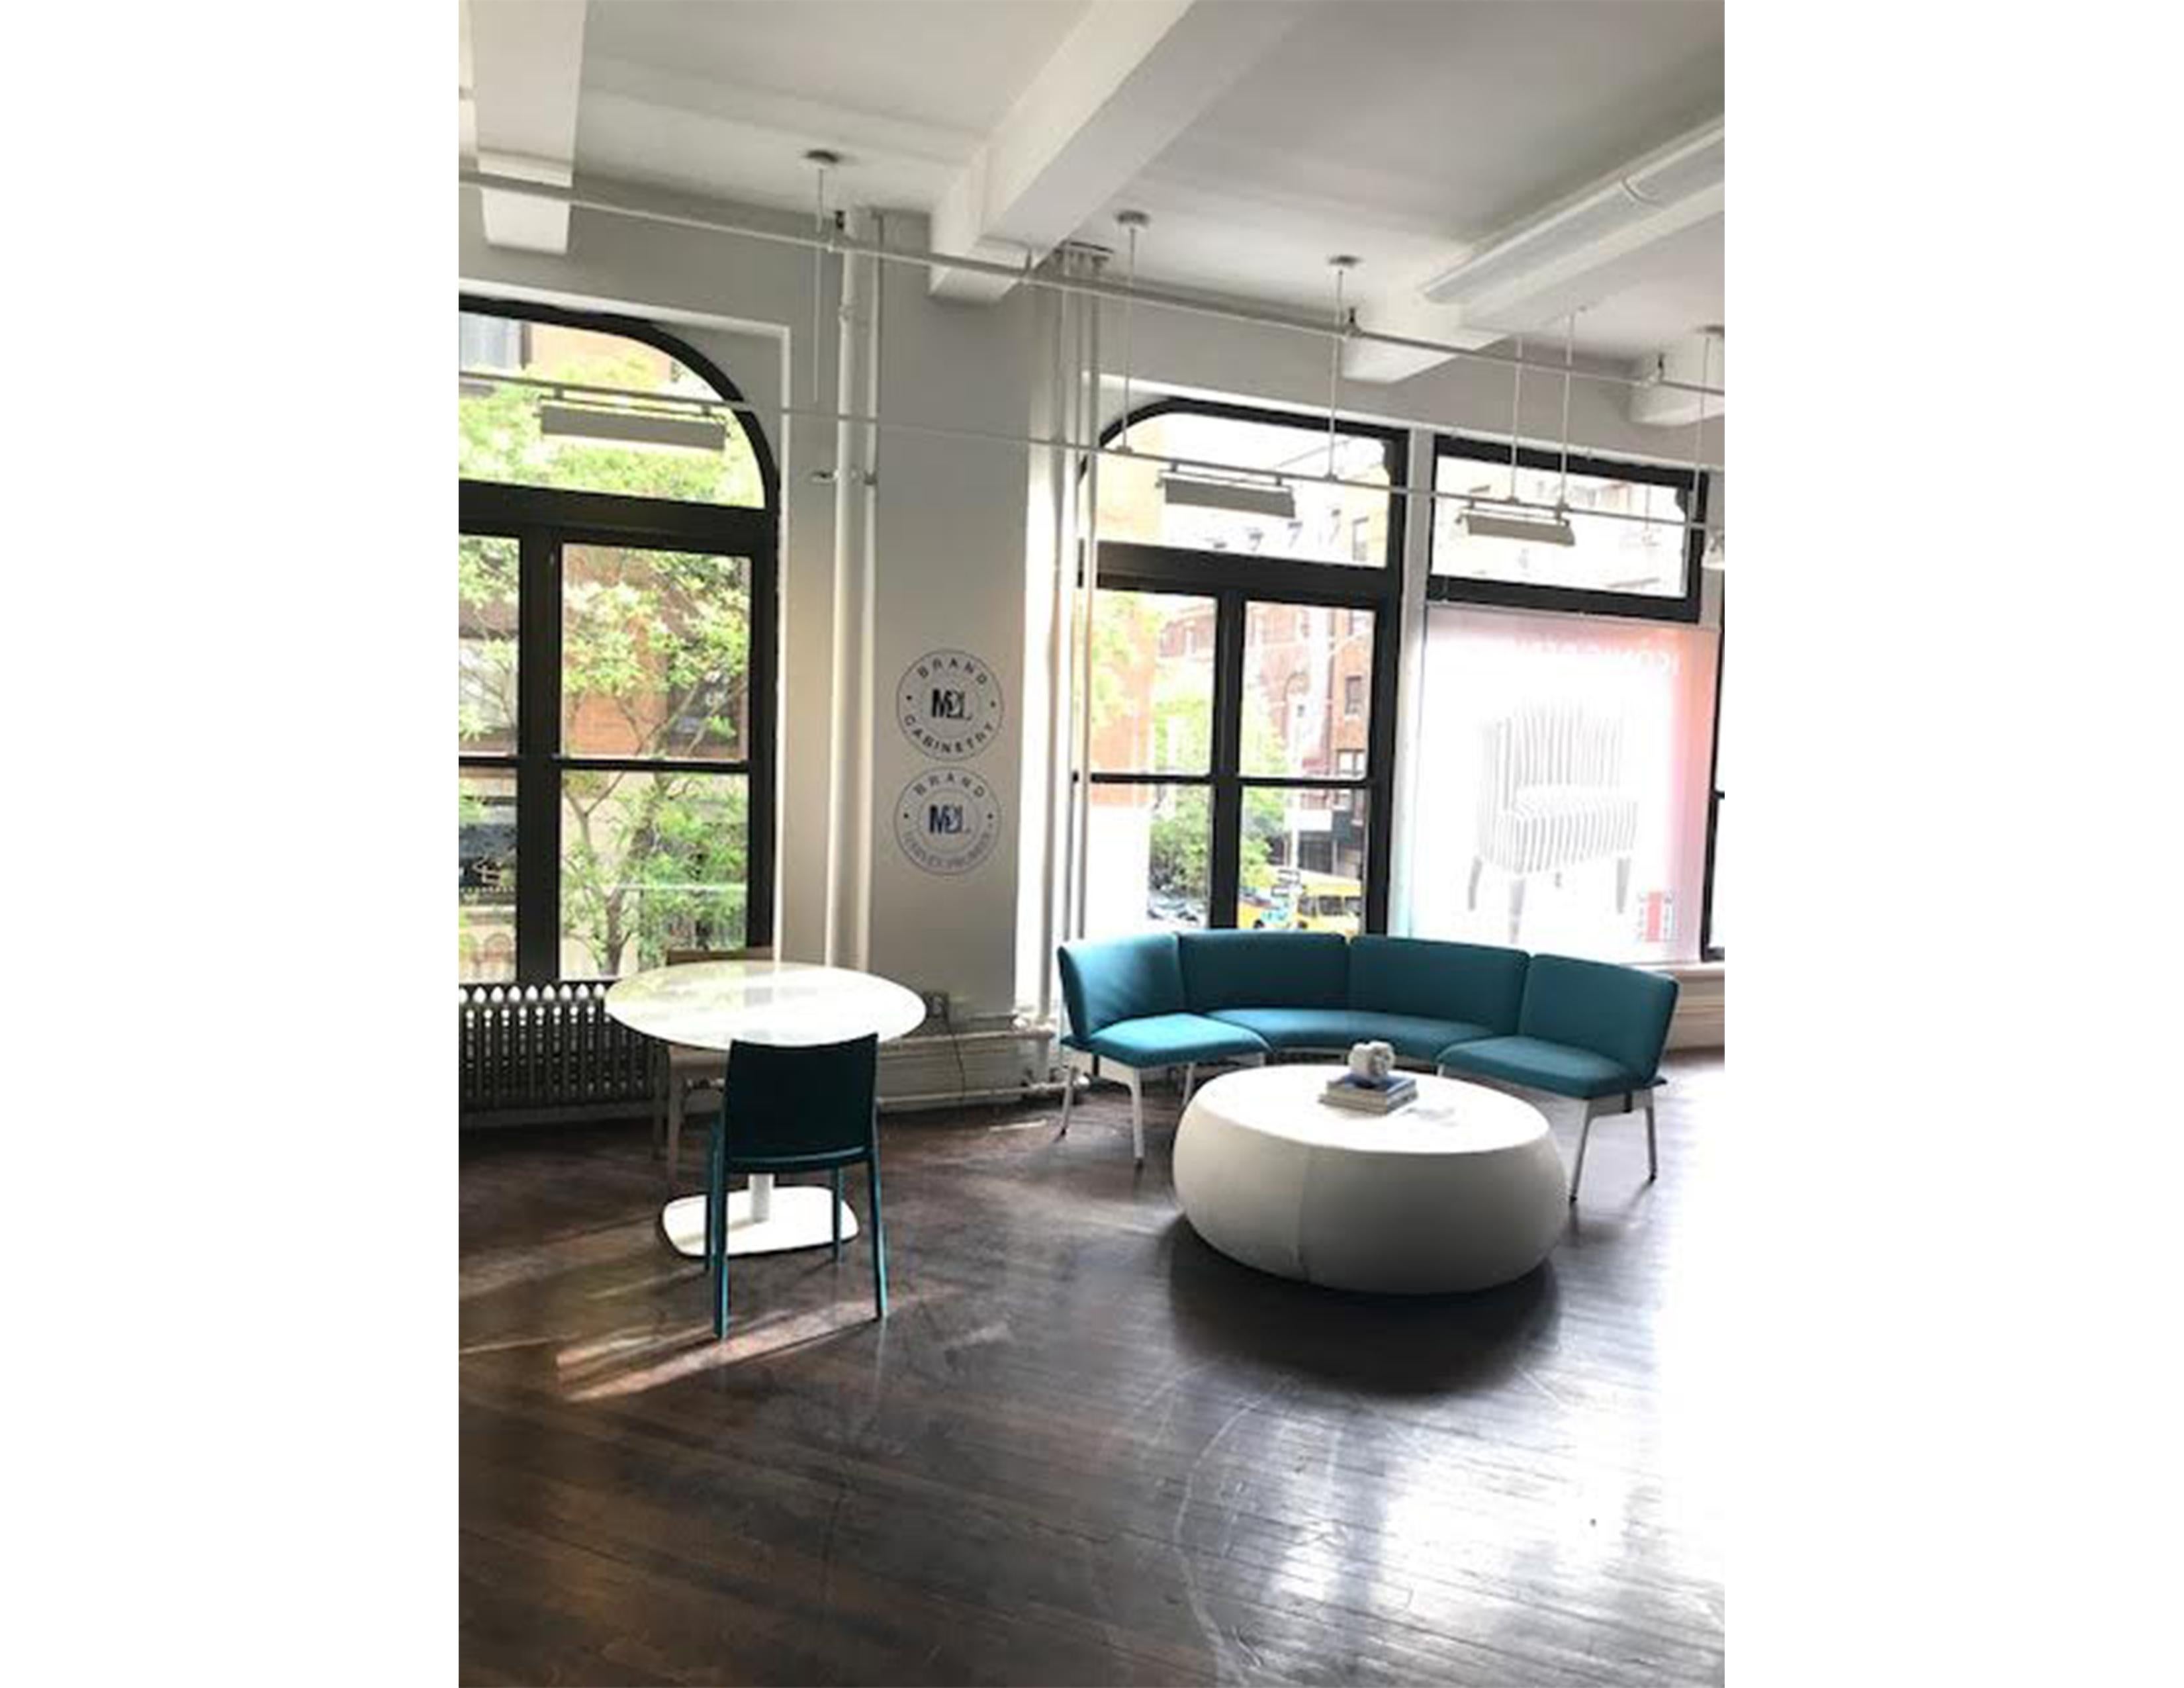 Mega bench
Configuration with back.
Upholstered in cat. 3 Jet #468 Cielo
Legs: white painted consisting of the following: Armless seat with curved back, left
Corner with back
Armless seat with curved back, right
Original price: $4,117.